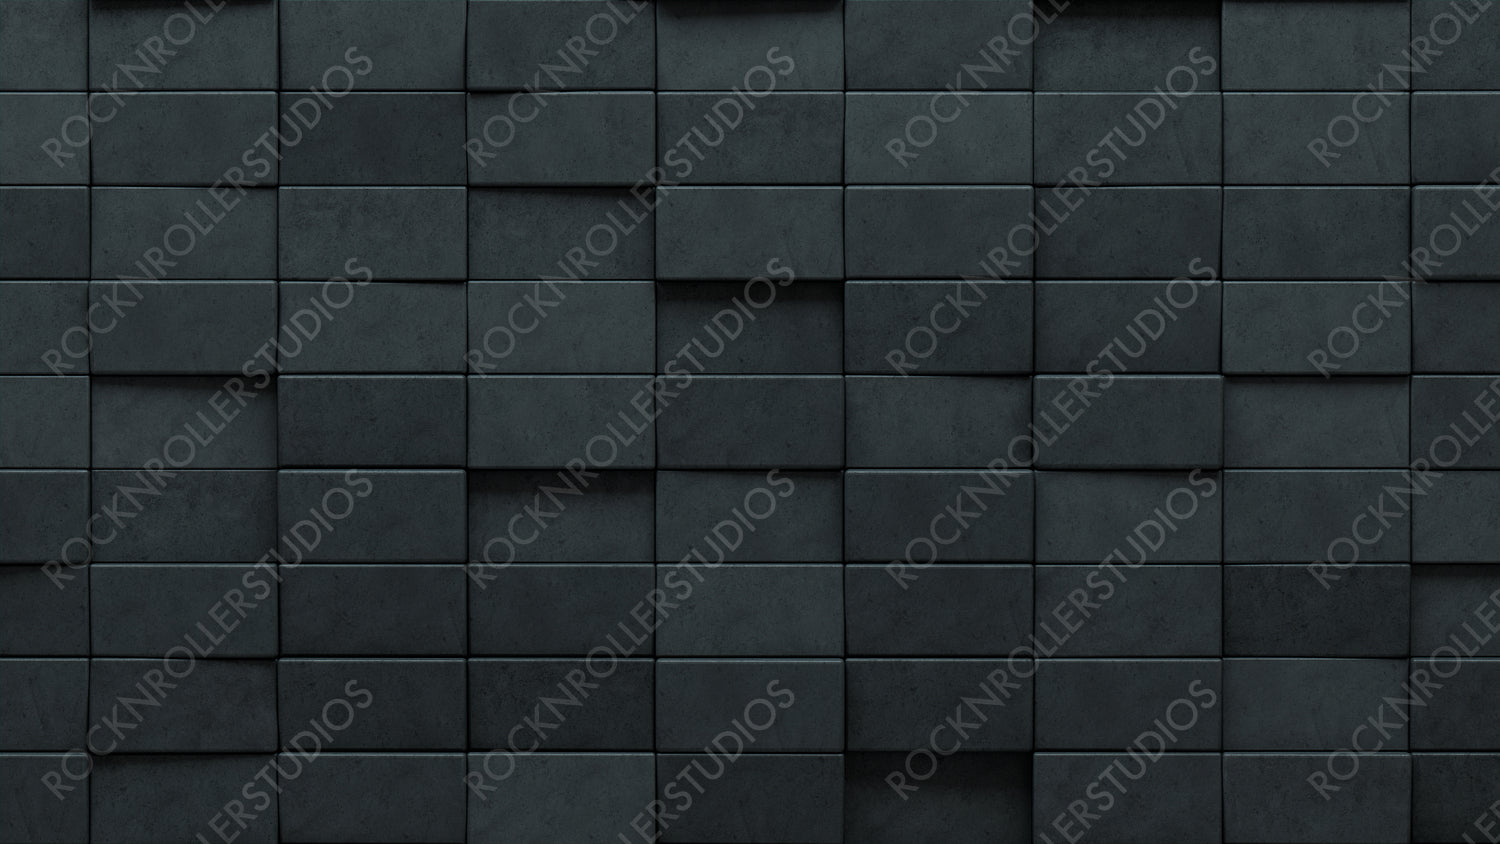 Rectangle, 3D Mosaic Tiles arranged in the shape of a wall. Concrete, Semigloss, Bricks stacked to create a Polished block background. 3D Render